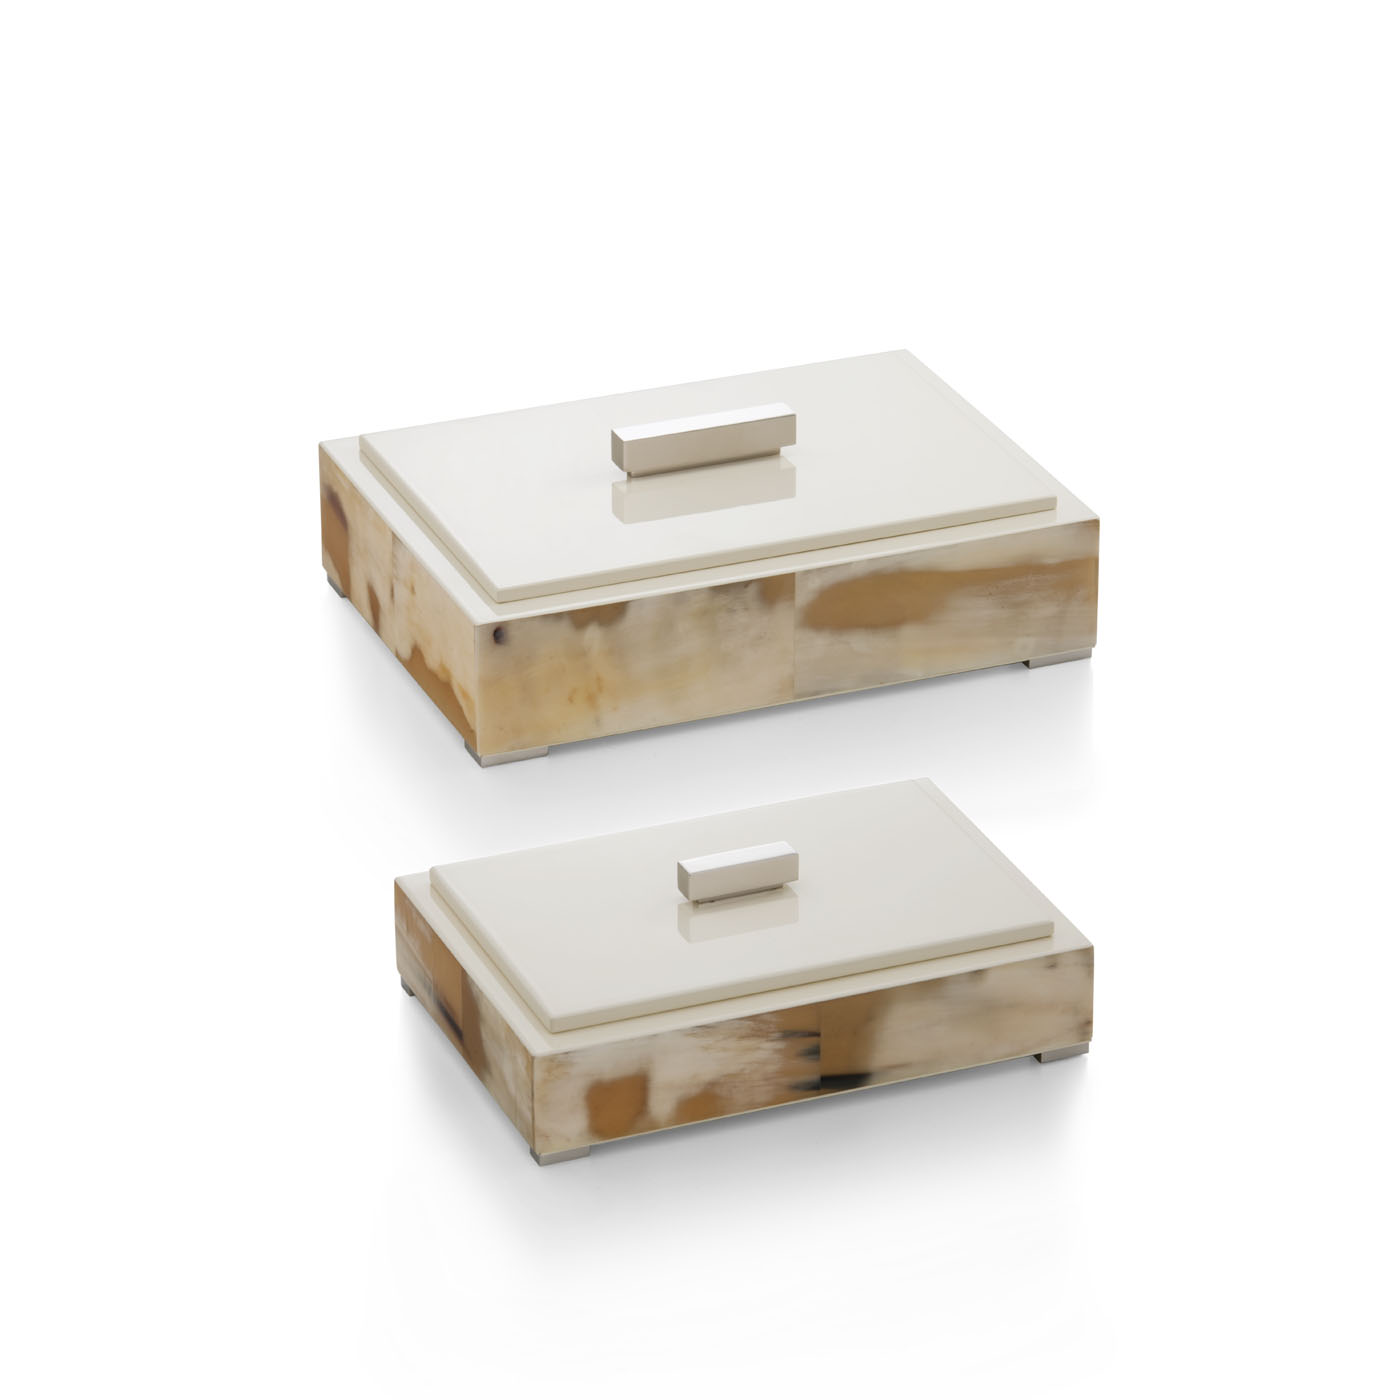 Picture frames and boxes - Lea boxes in horn and glossy ivory lacquered wood - ambiance picture -Arcahorn